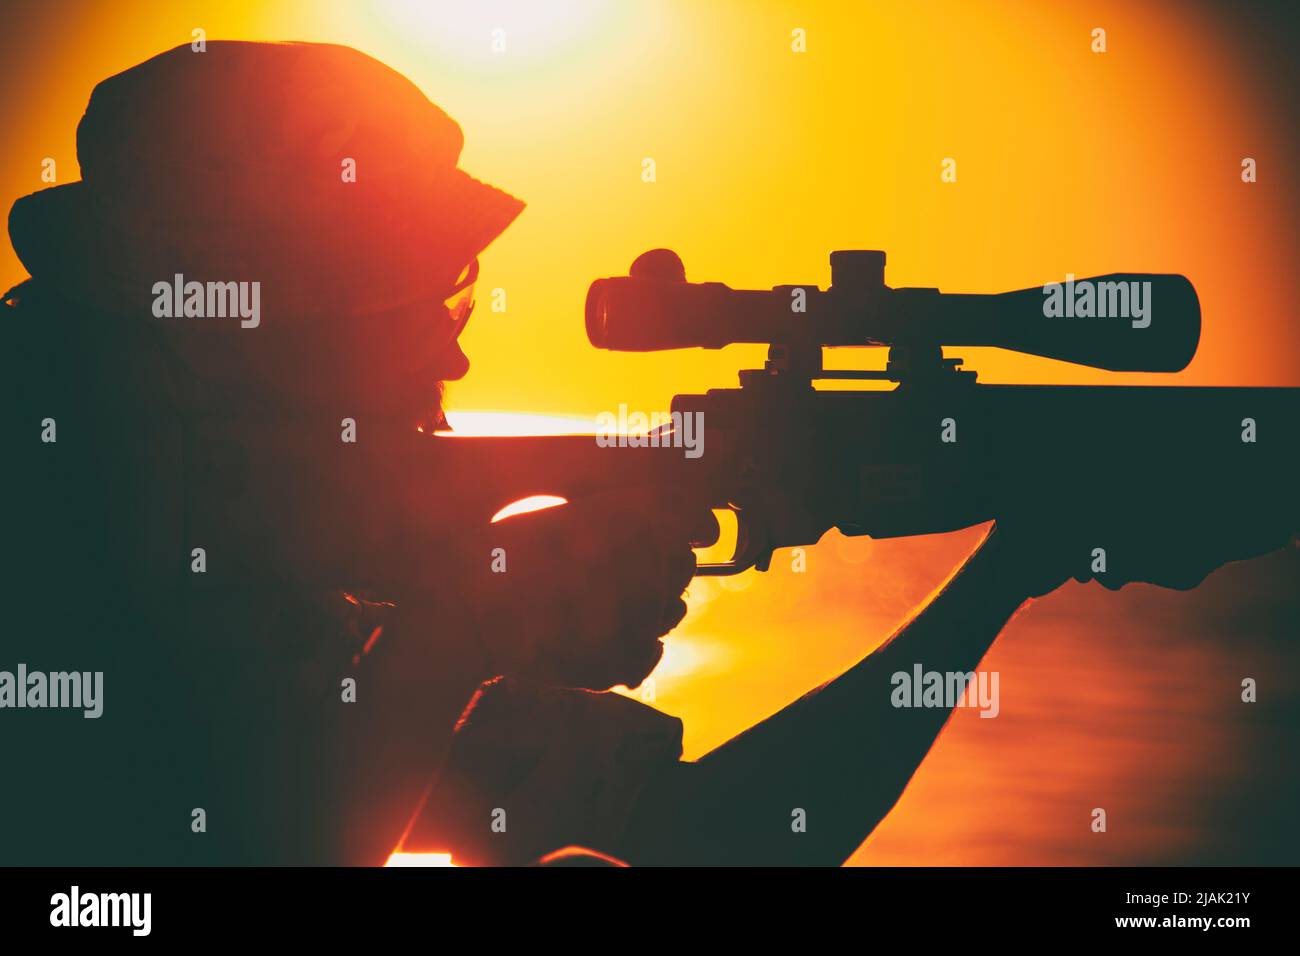 Silhouette of a sniper aiming rifle while sitting on the ocean shore during sunset. Stock Photo